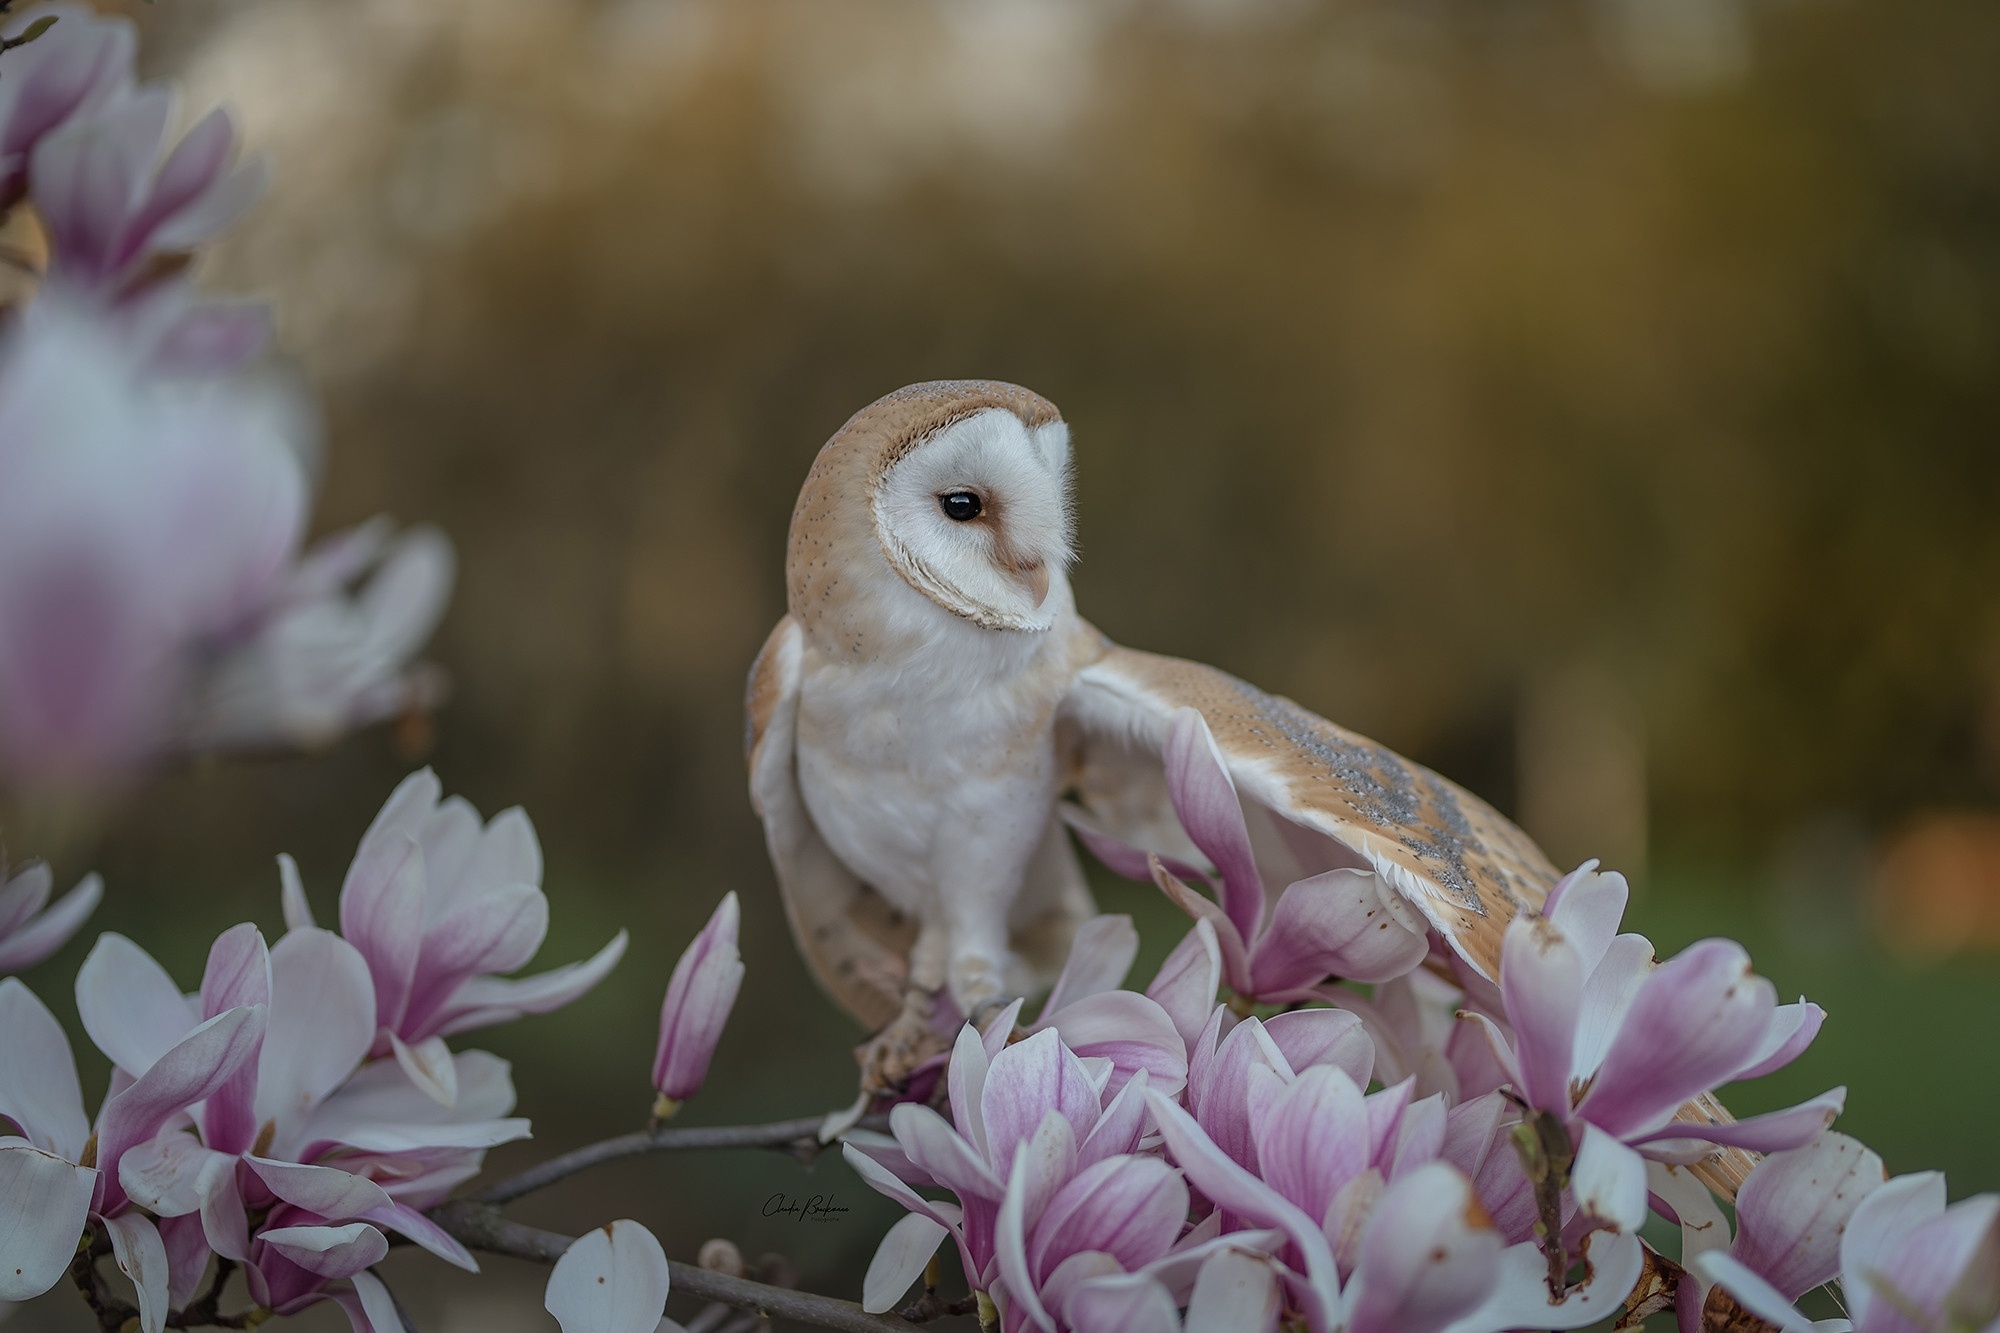 A white owl sits on a branch with pink flowers